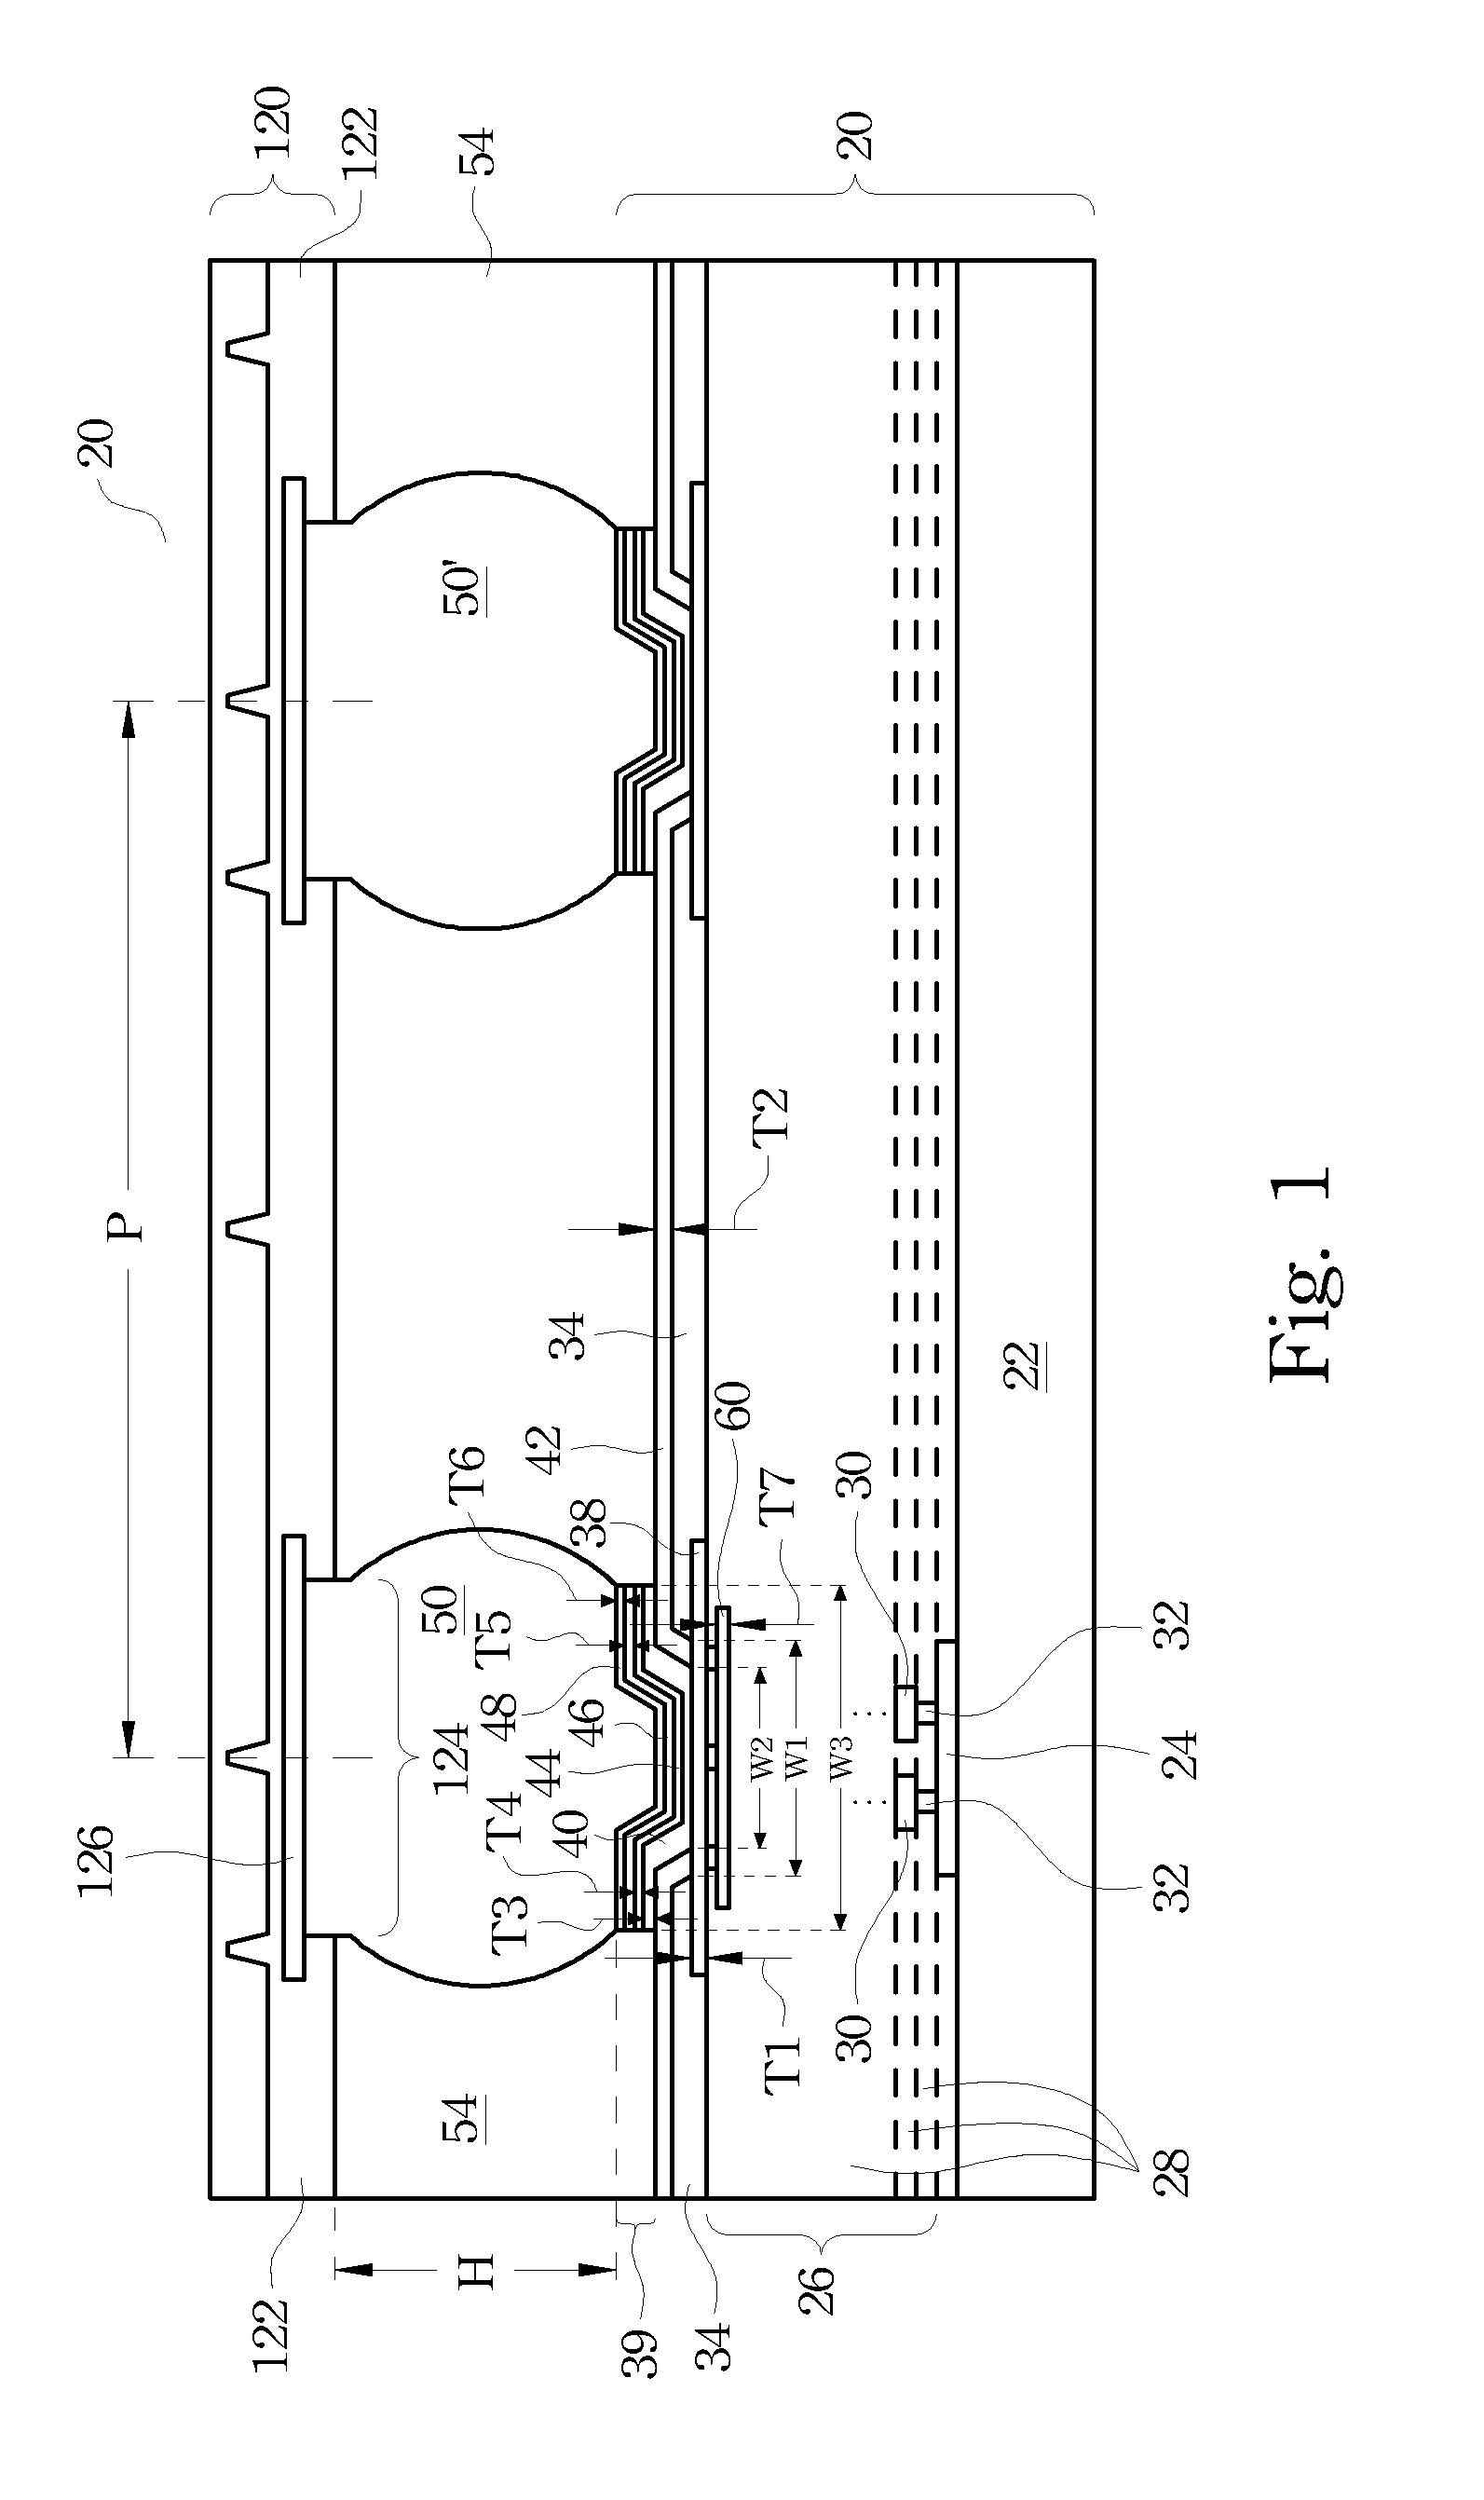 Interconnect Structures Having Lead-Free Solder Bumps